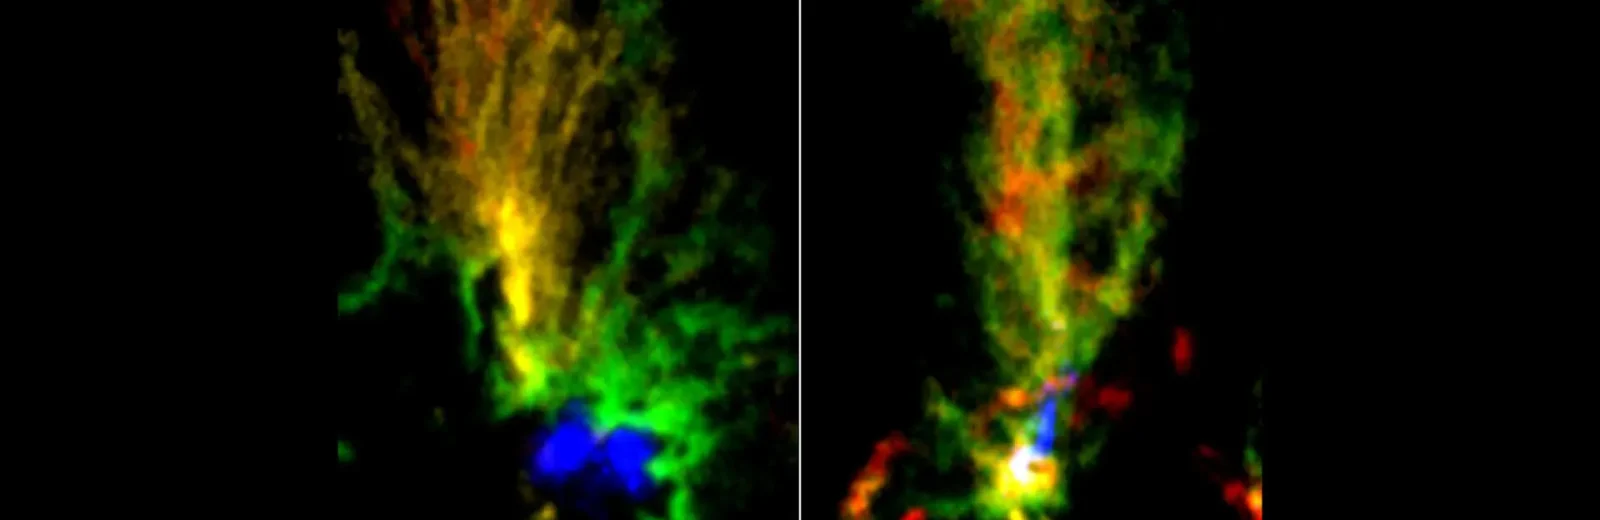 Star-spawning ‘peacock clouds’ hint at galaxy interaction